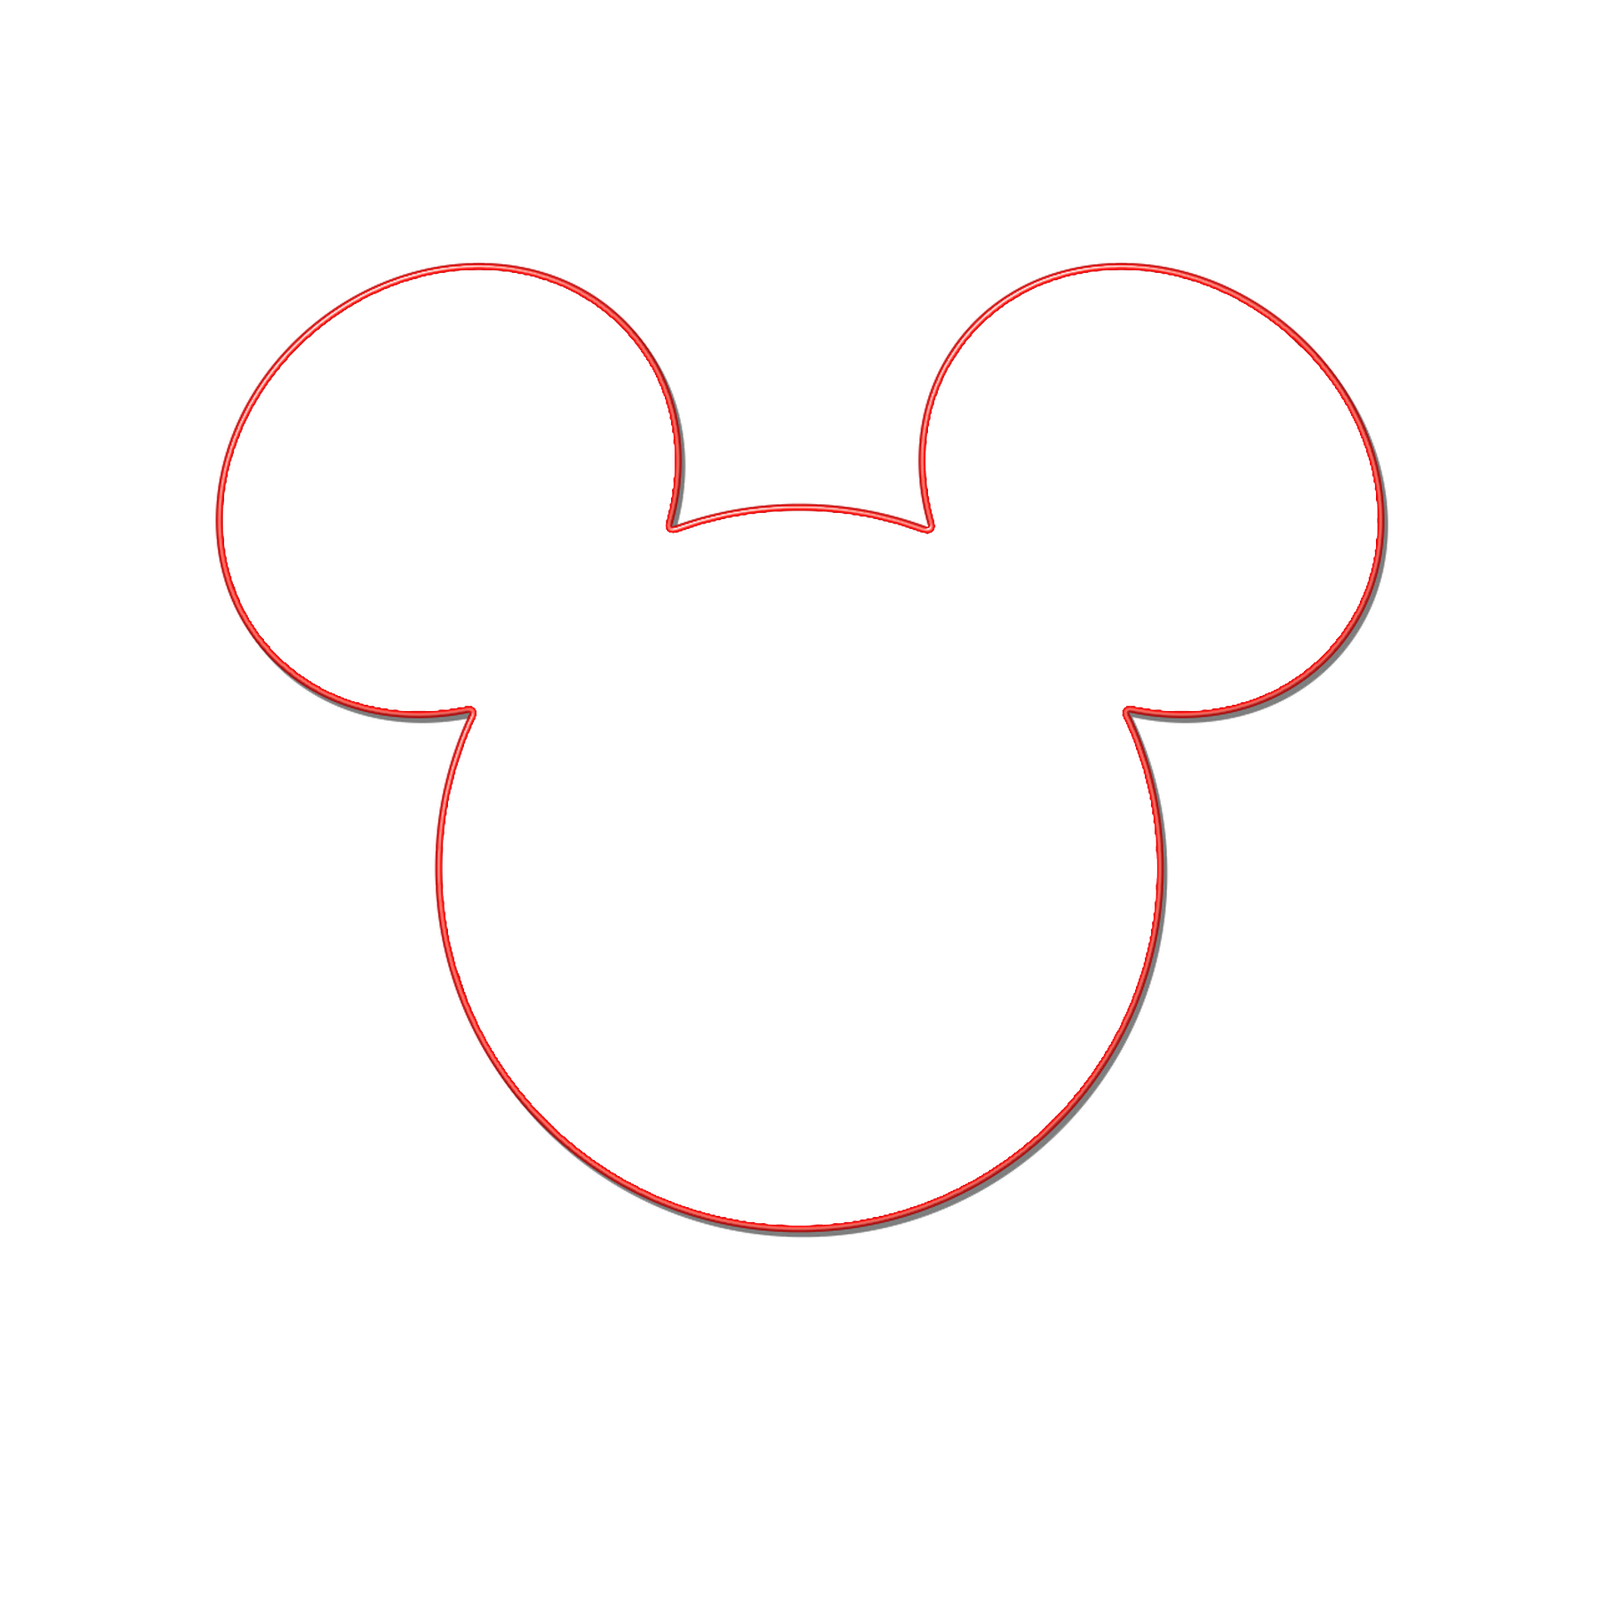 36 Mickey Mouse Ears Clip Art Free Cliparts That You Can Download To